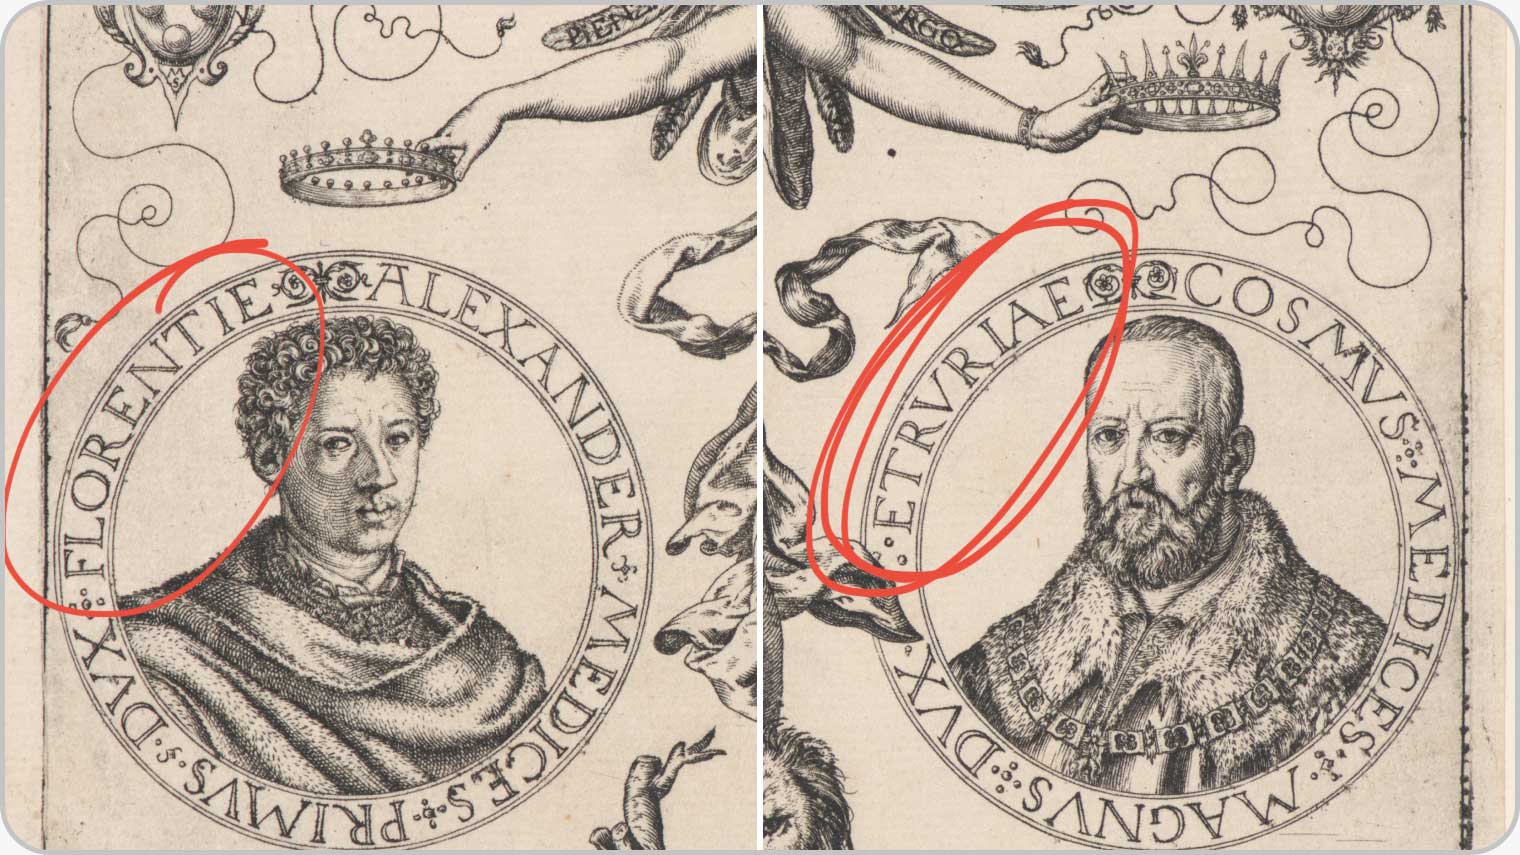 Detail of an engraving; red mark-ups that are not original to the artwork have been added digitally to point out details in the image such as the inscription “Duke of Florence” encircling the medallion portrait on the left and the inscription “Grand Duke of Tuscany” encircling the medallion portrait on the right